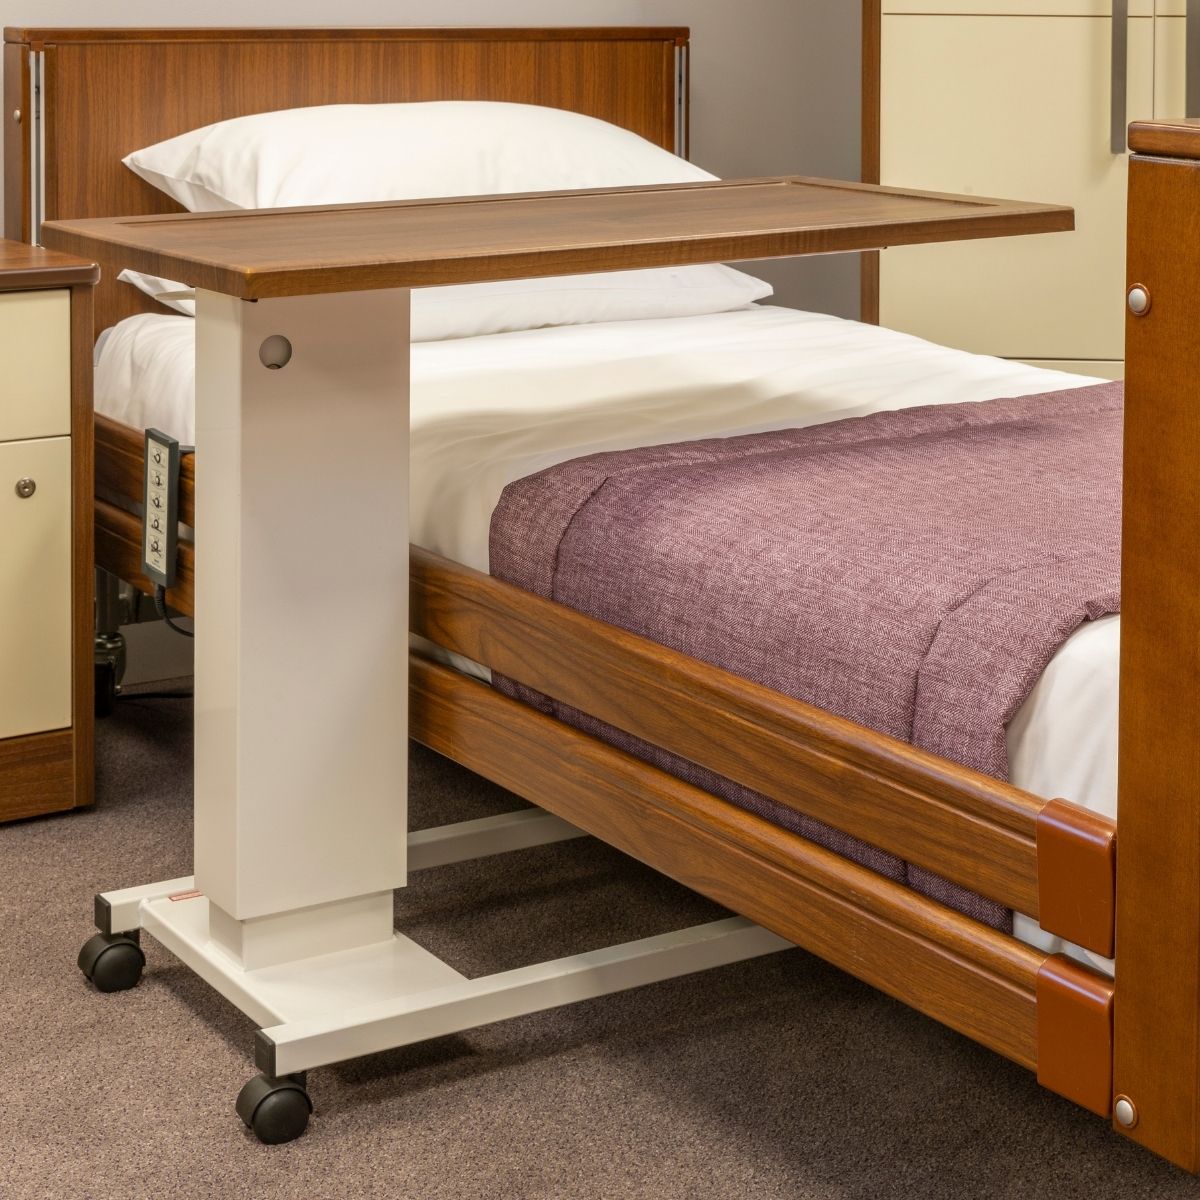 profiling care bed and over bed table in walnut